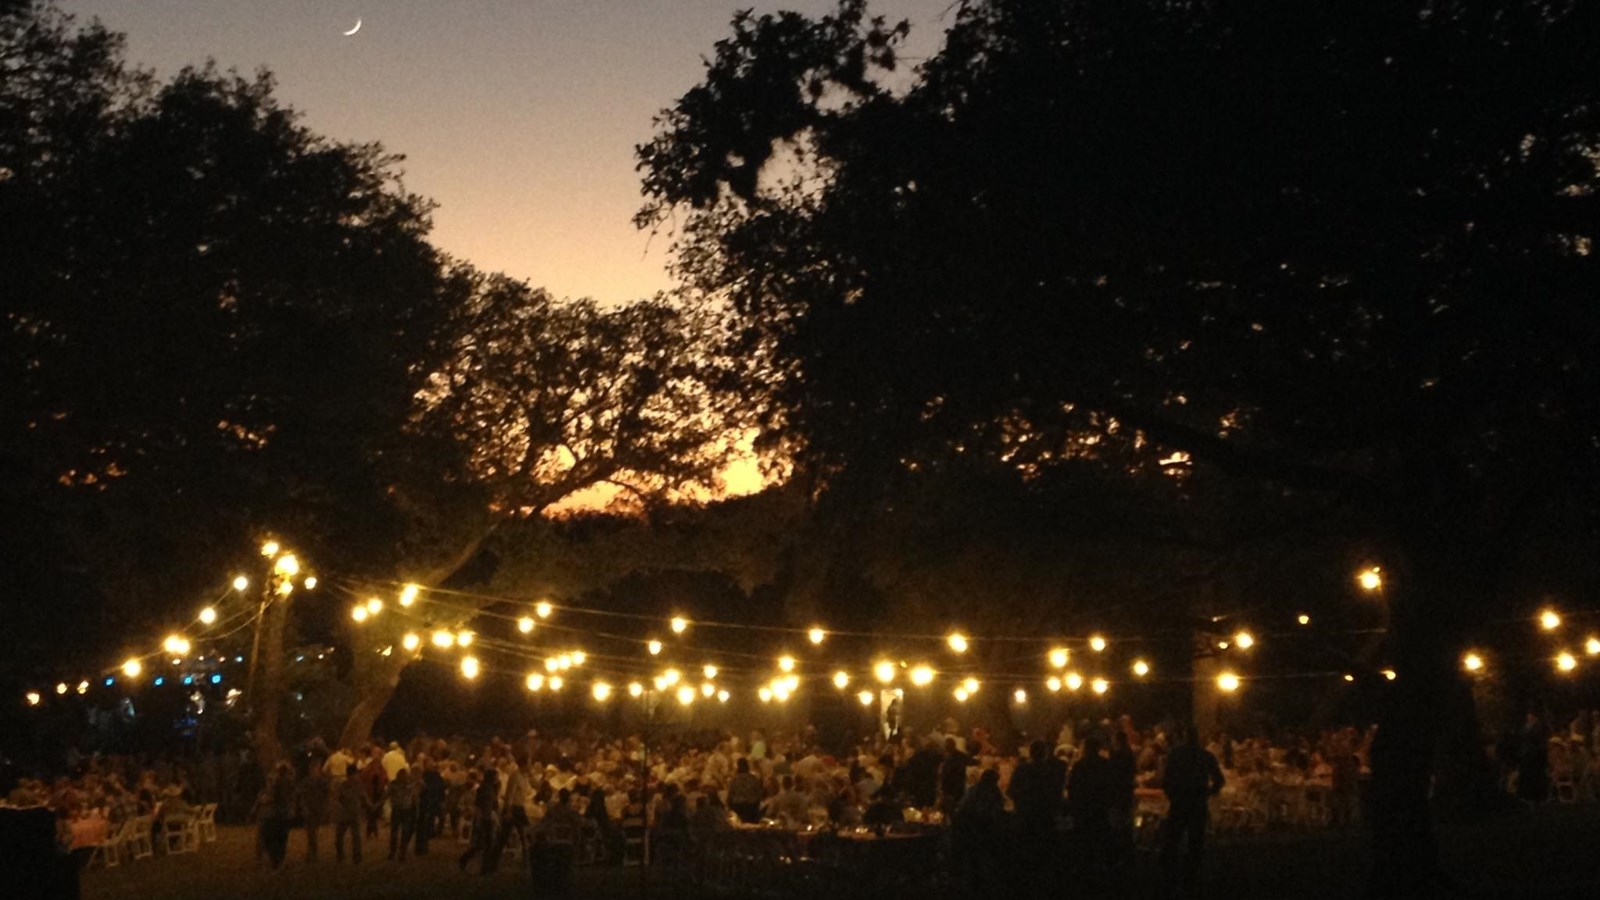 Under a twilight sky and shadowed trees, lights are strung above a large gathering of people.